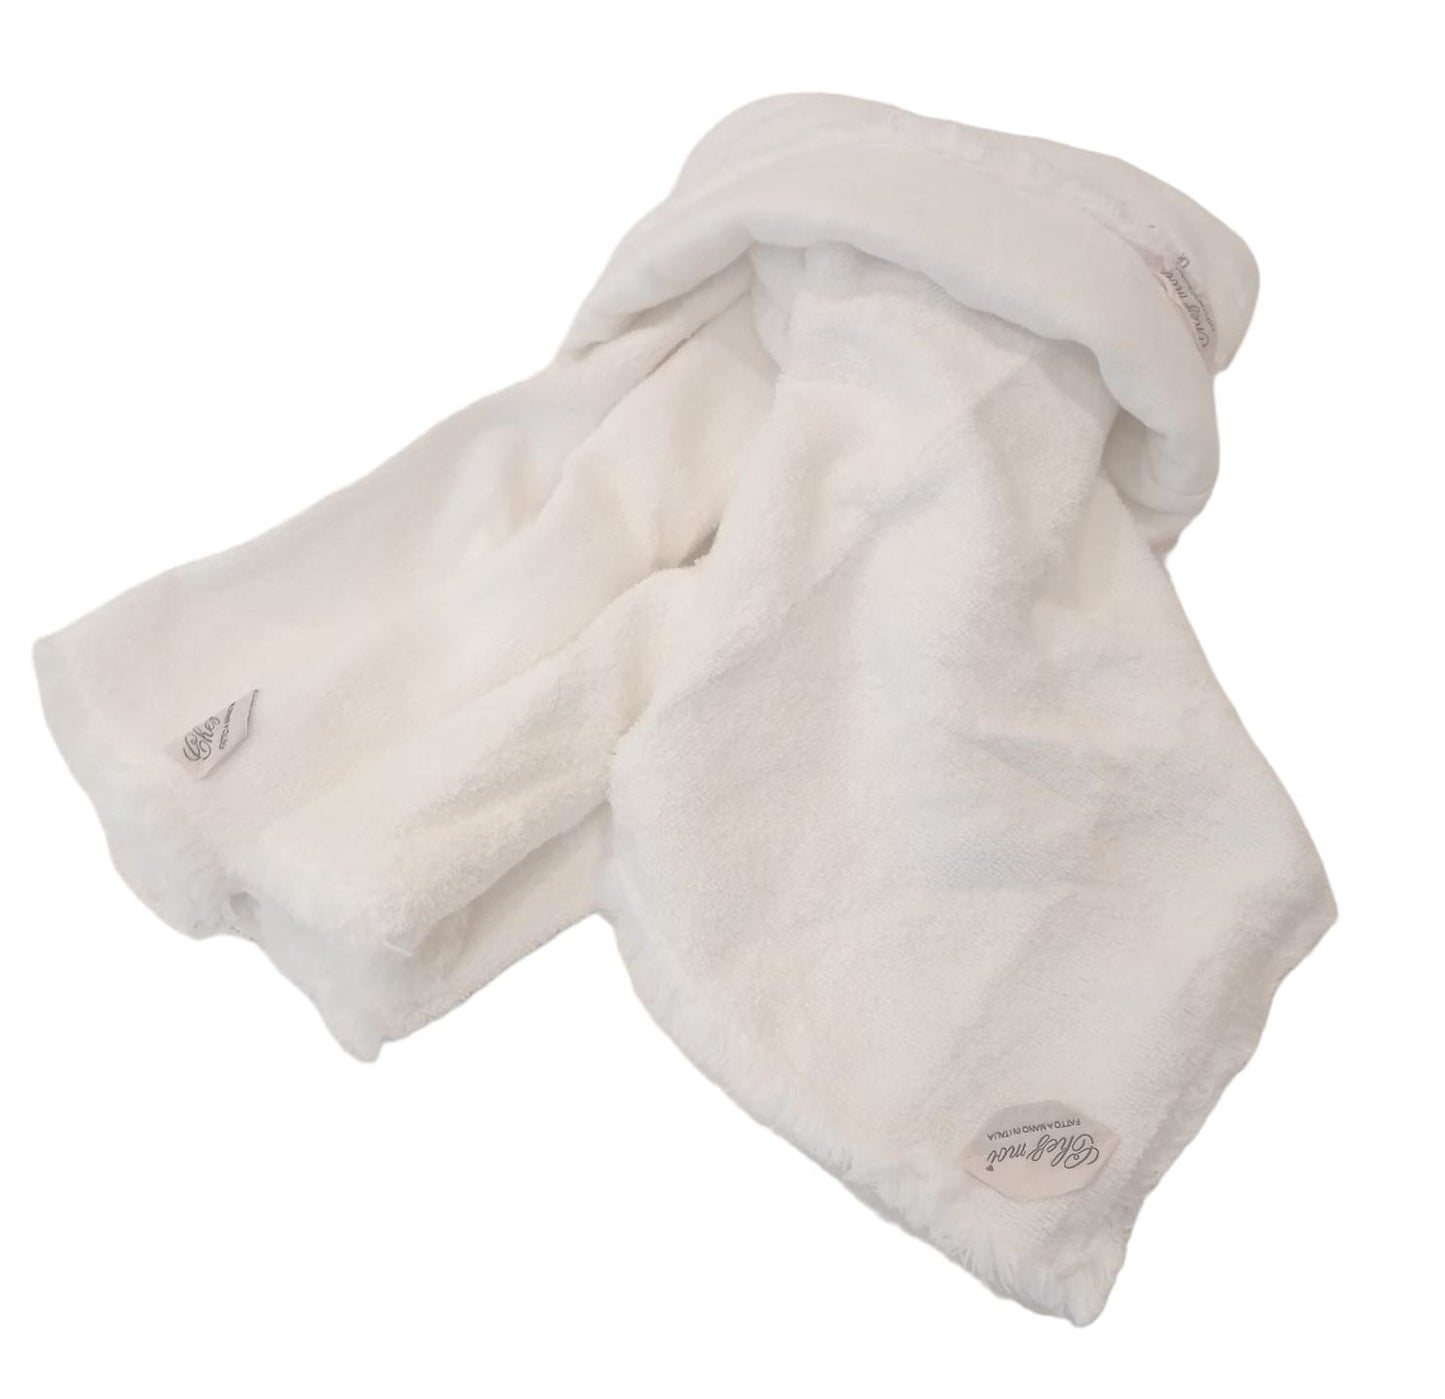 Generic Marika De Paola - Washcloths 35x35 CM, Face and Bidet Towels, Guest Towels, 100% Cotton, 100% Made in Italy